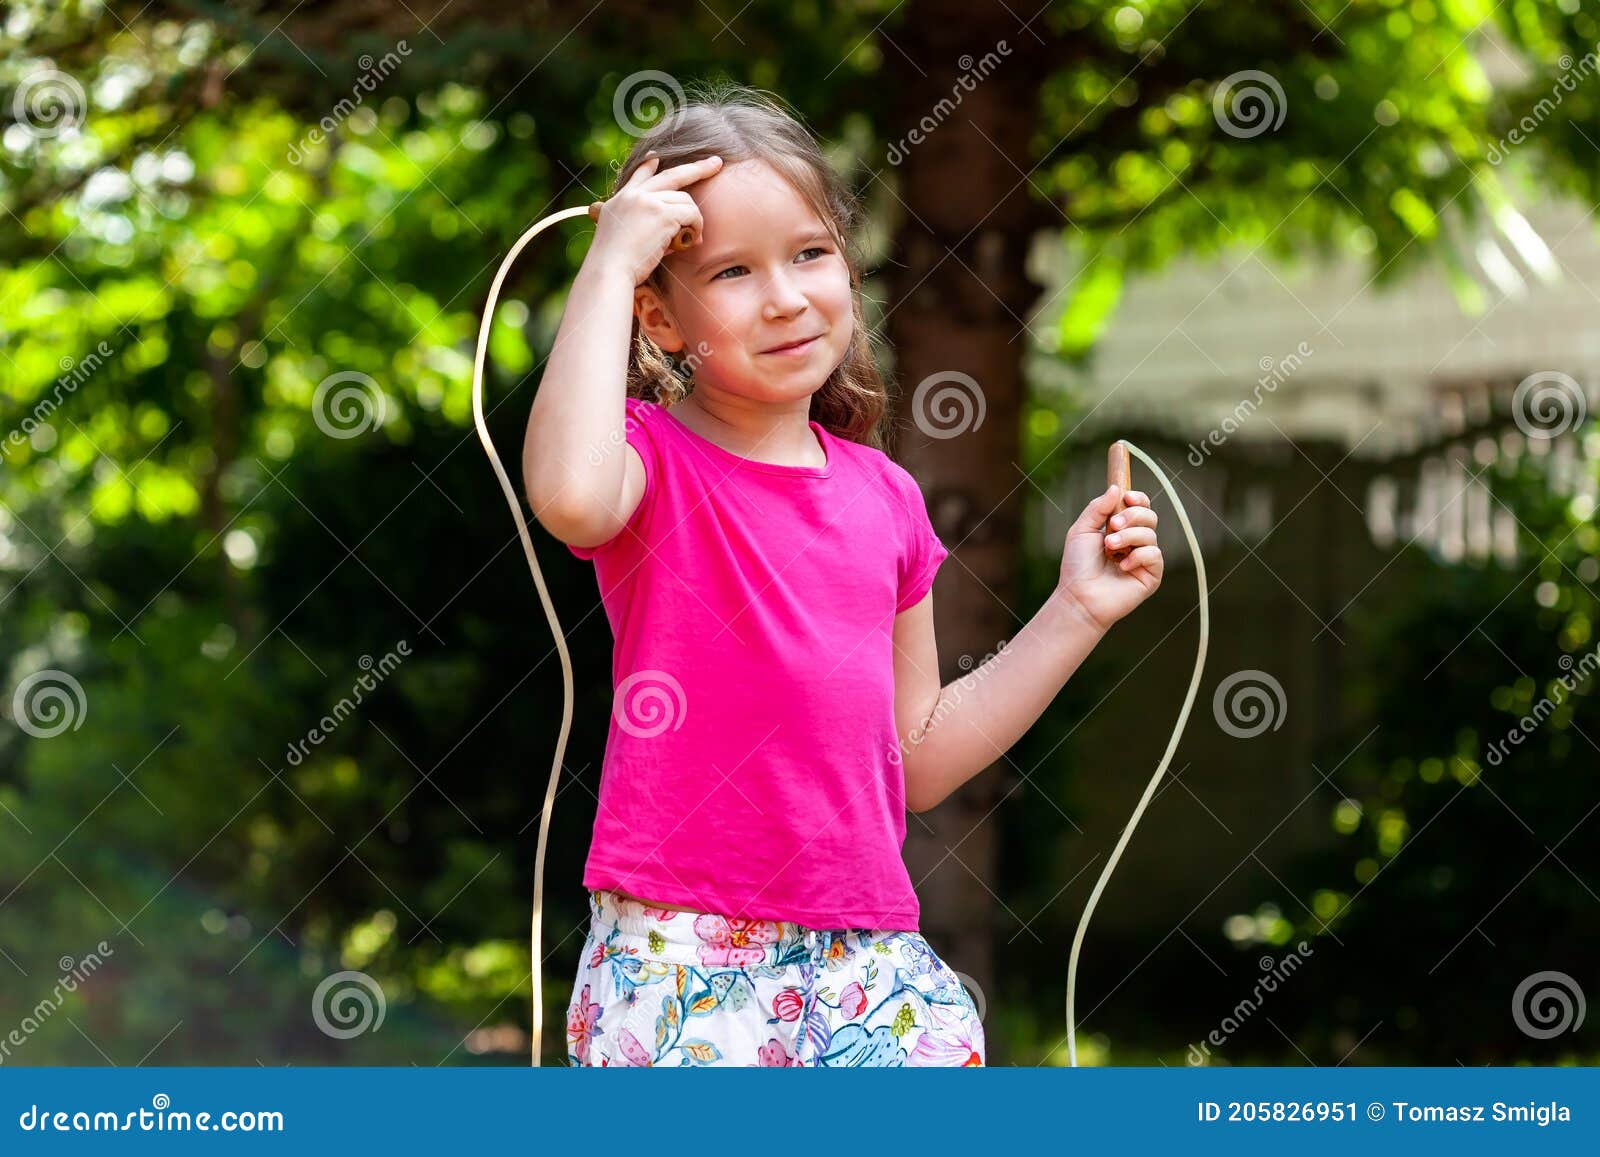 One Happy Little Girl, Child with a Jumping Rope in the Garden